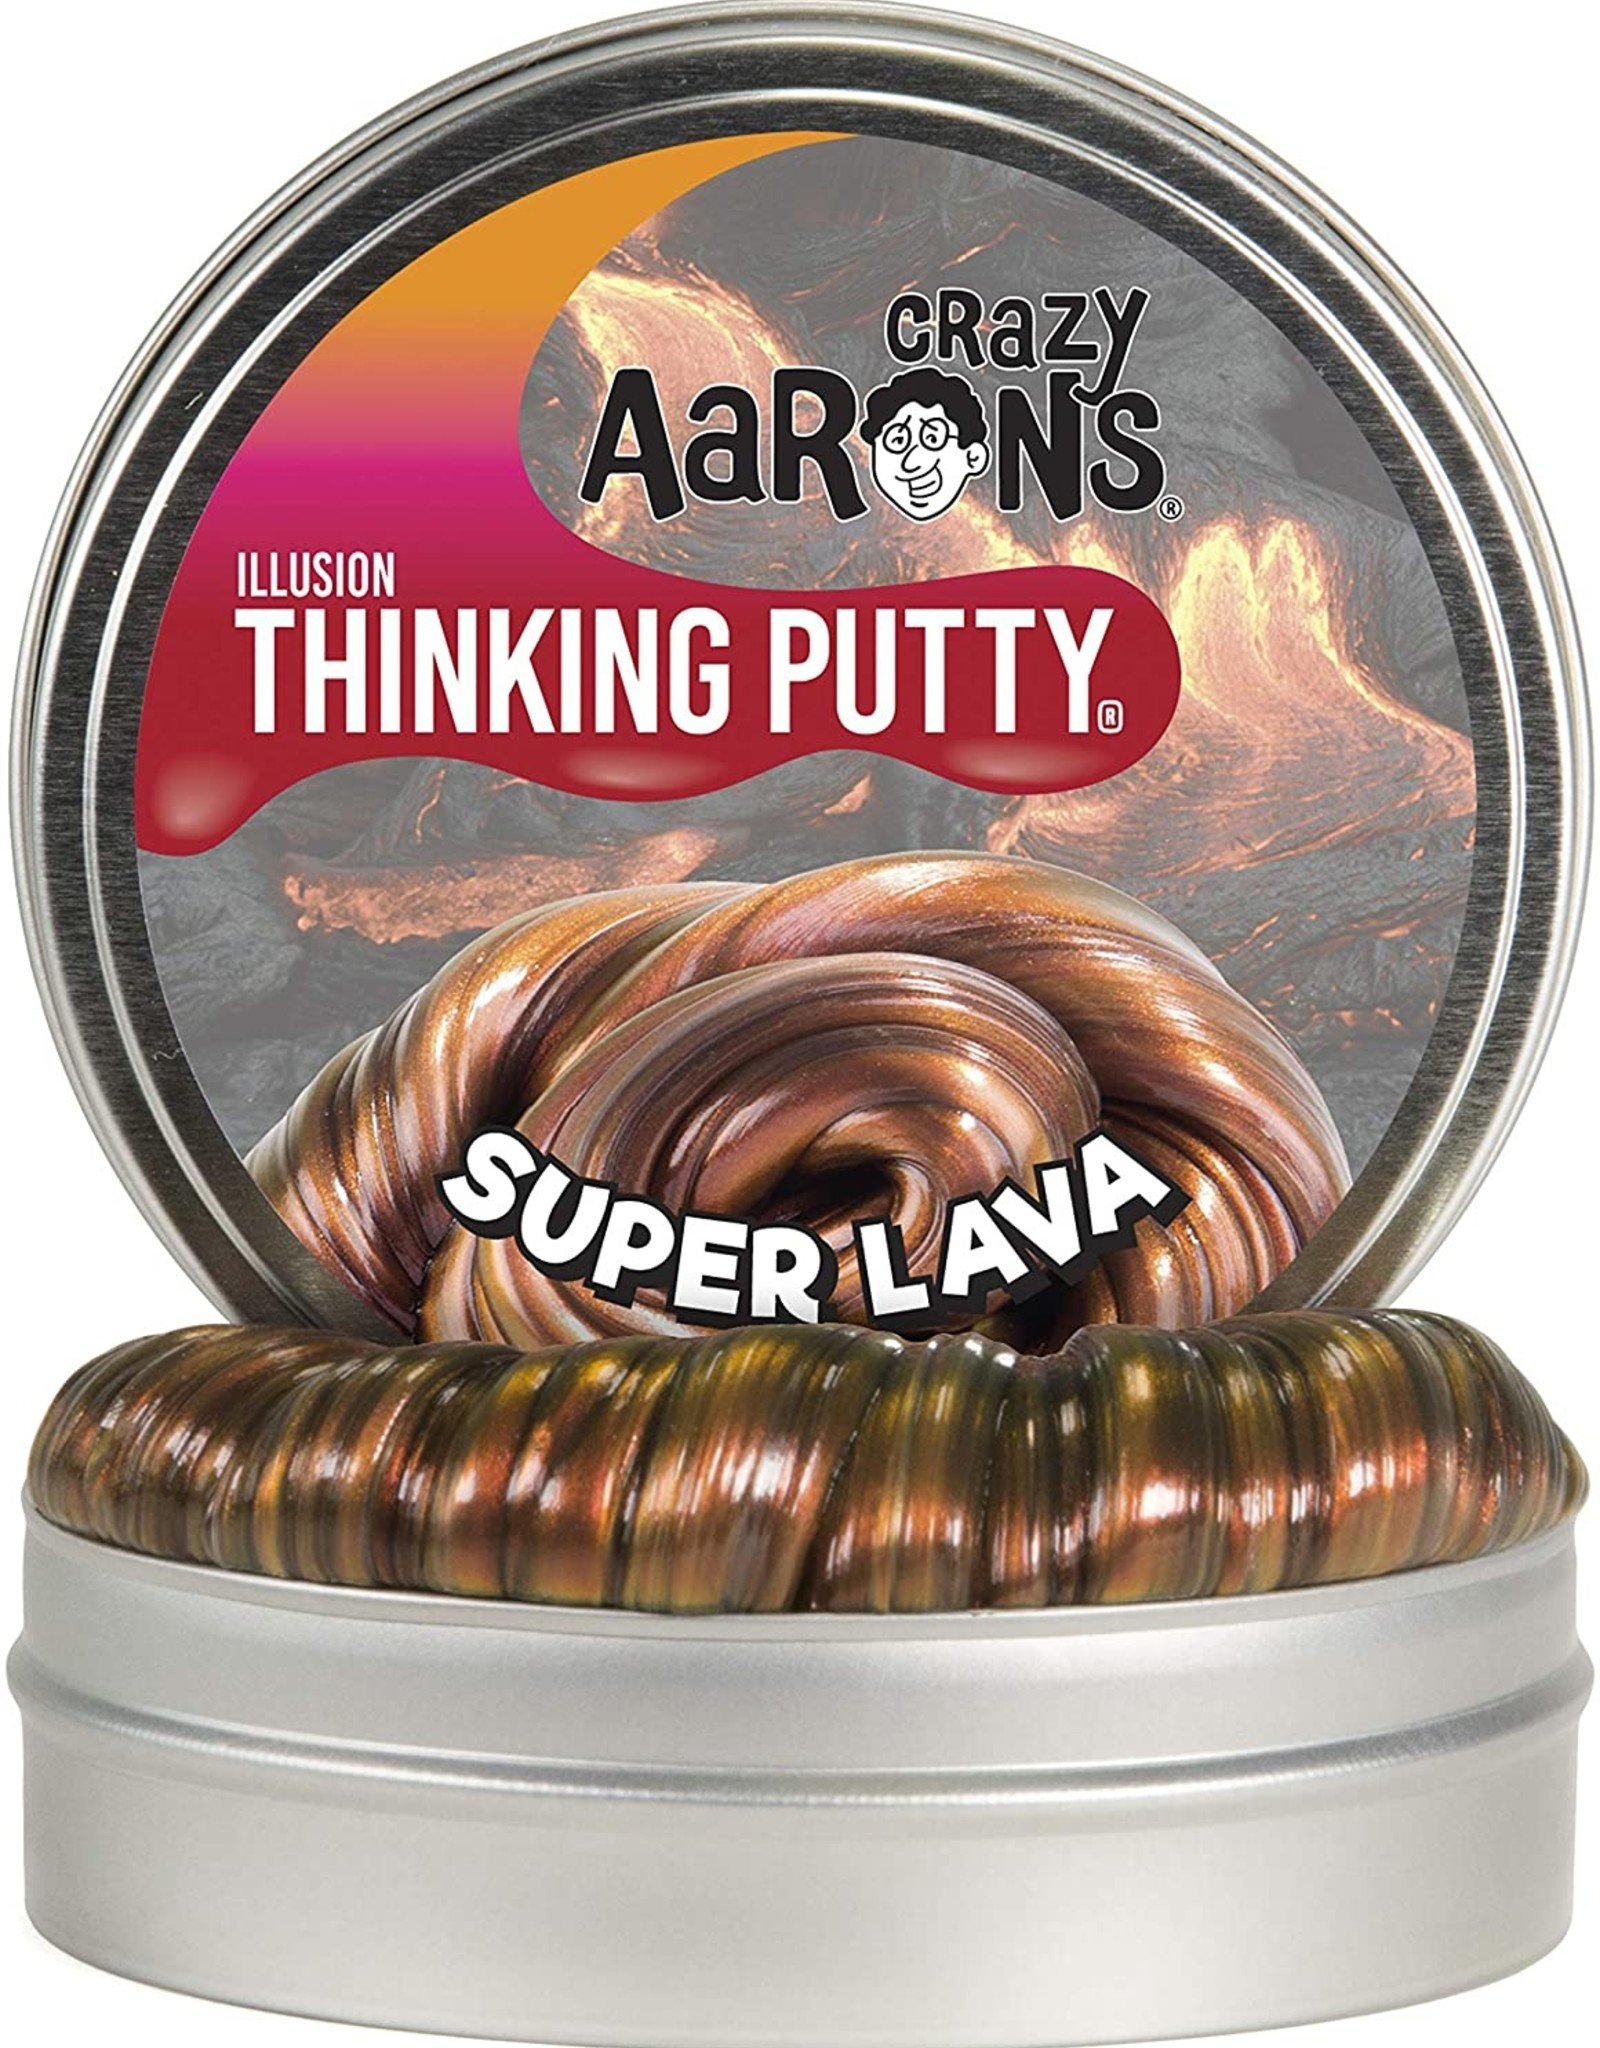 Crazy Aaron's Thinking Putty Crazy Aarons Super Lava Super Illusions 4"